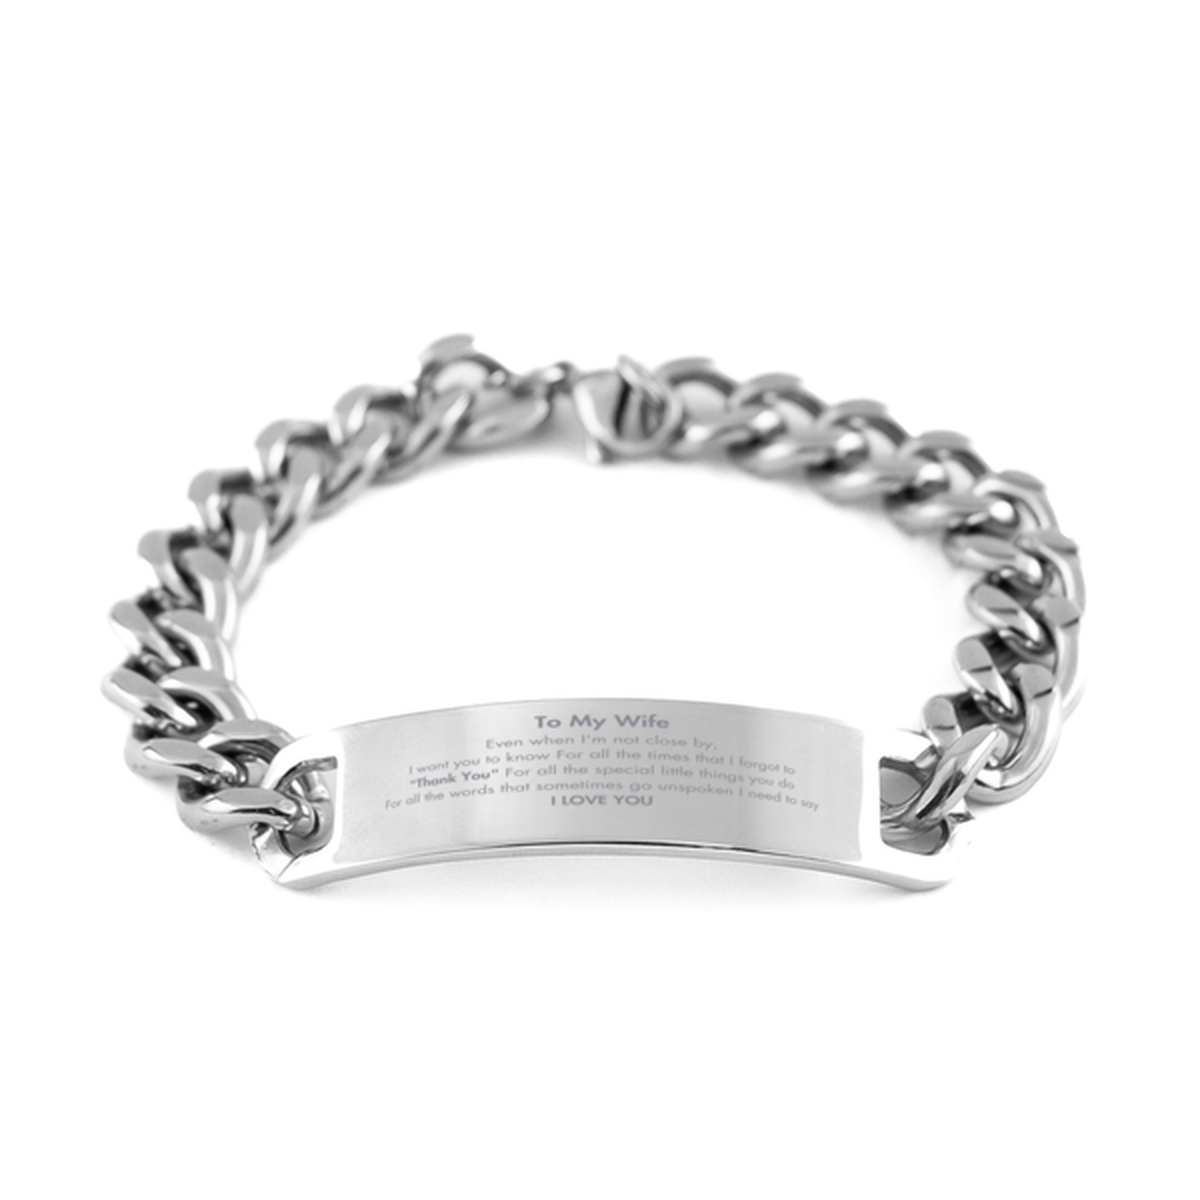 Thank You Gifts for Wife, Keepsake Cuban Chain Stainless Steel Bracelet Gifts for Wife Birthday Mother's day Father's Day Wife For all the words That sometimes go unspoken I need to say I LOVE YOU